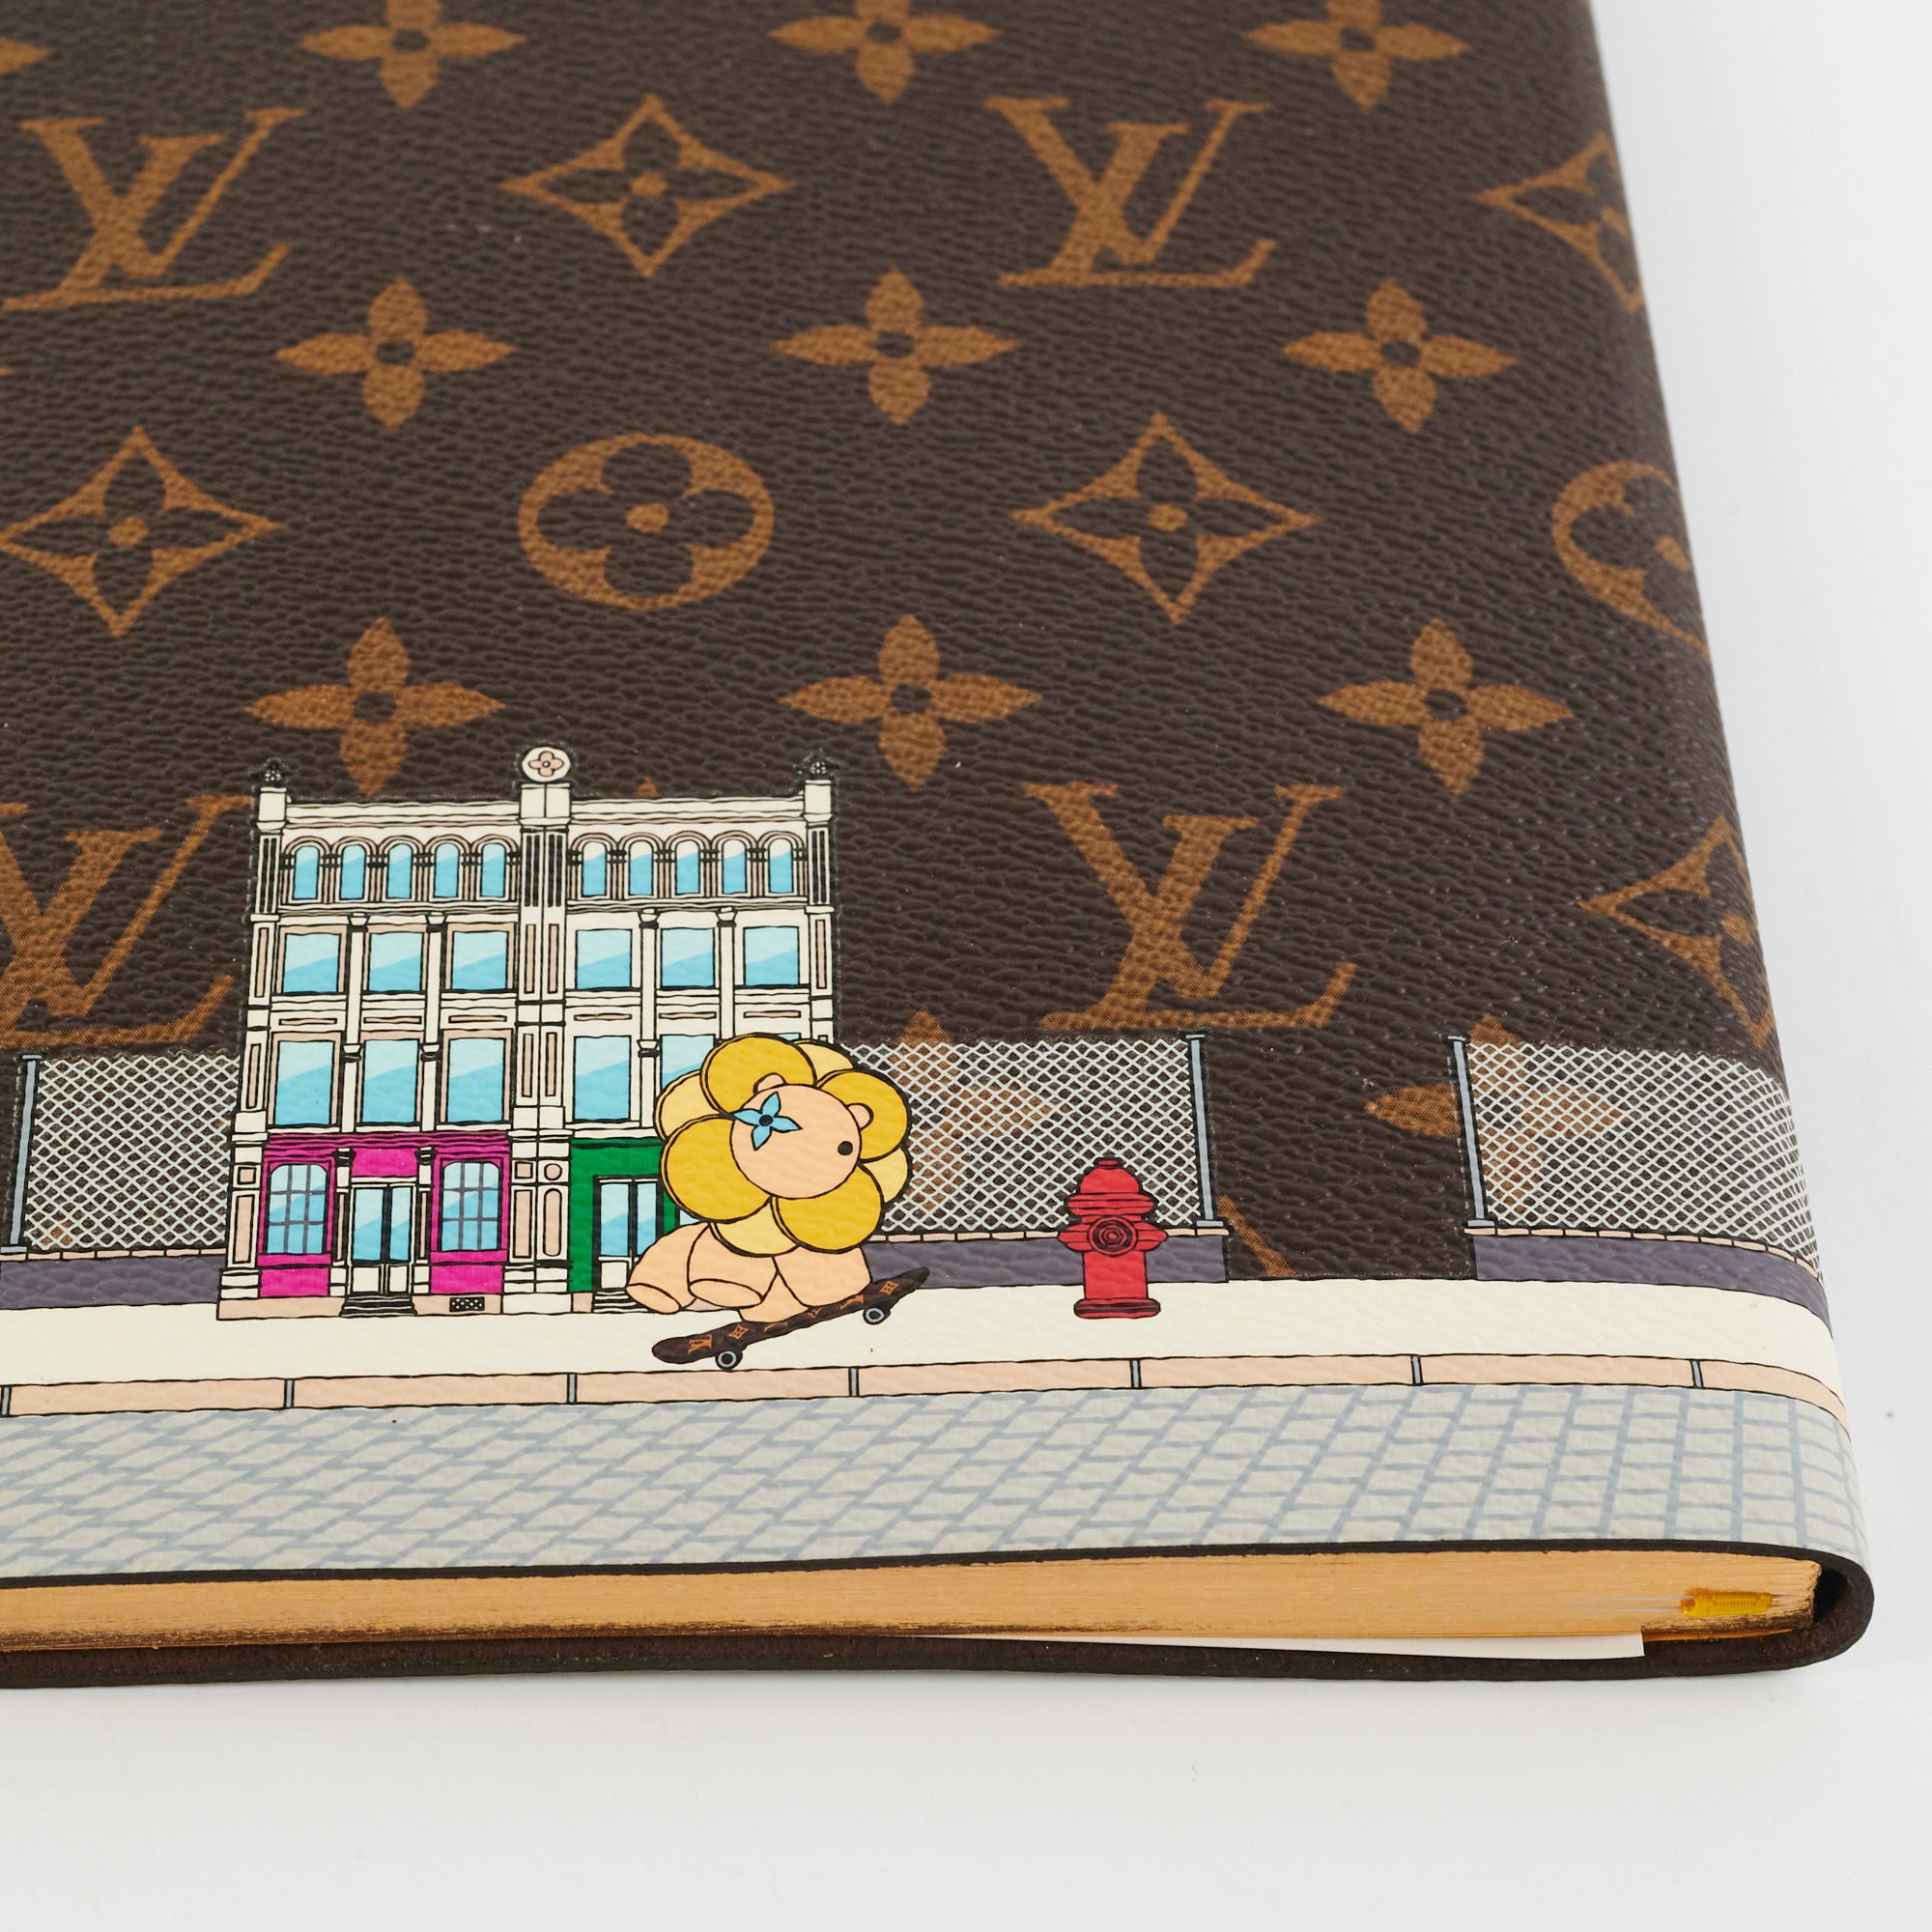 A Look at Louis Vuitton's New Christmas Animation Print for 2016